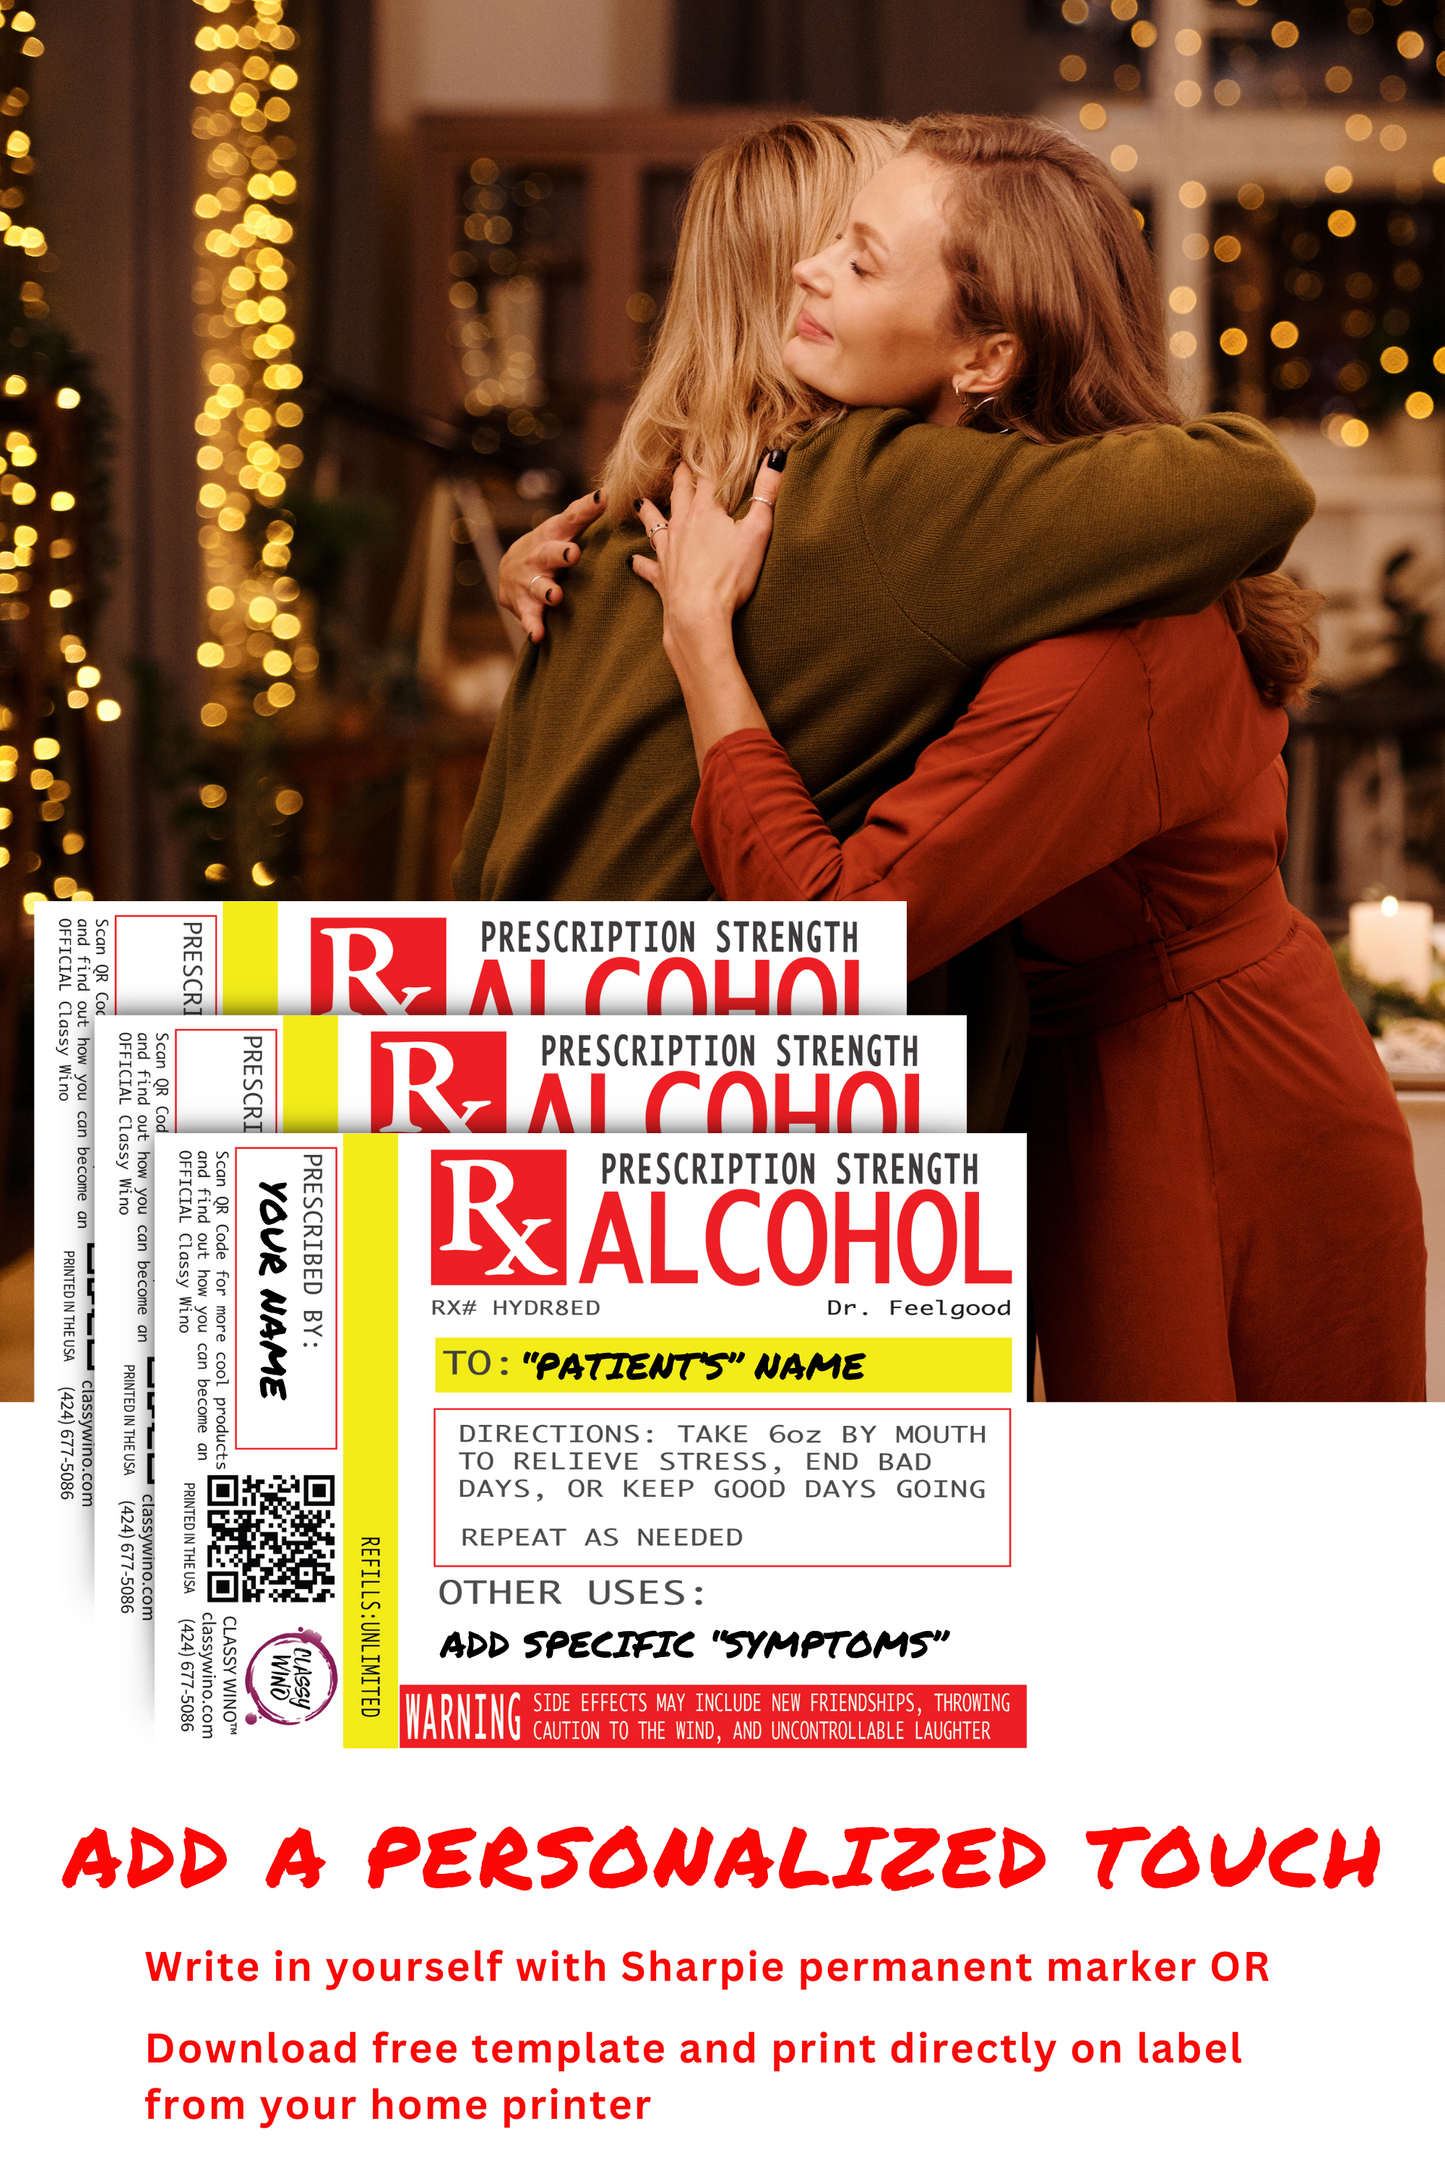 Funny Gag Prescription Label for Alcohol & Wine Bottles - Use A Personalized Removable Sticker for Vodka, Tequila, or Whiskey Bottle Not A Boring Wine Gift Bag - Drinking Accessories for Men & Women